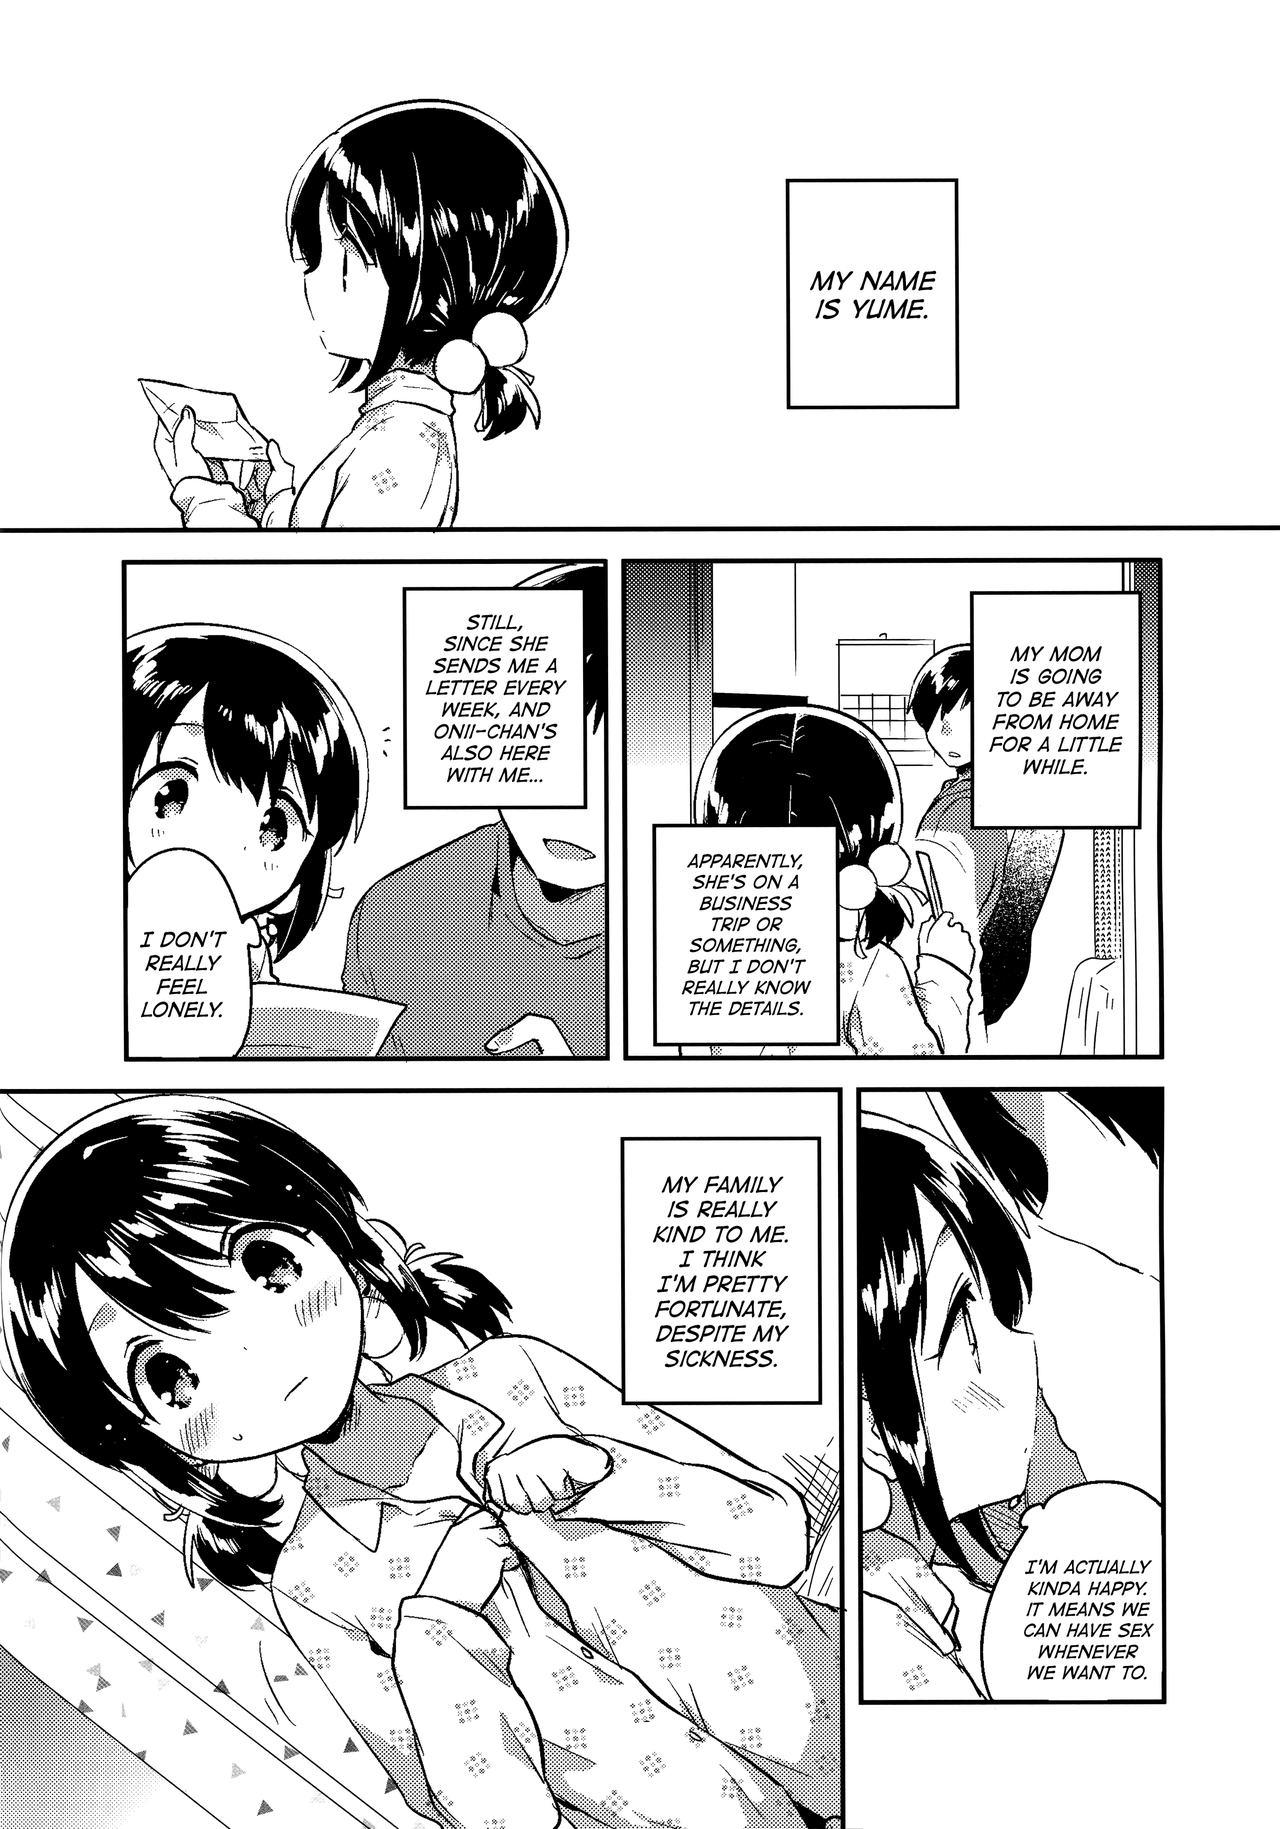 Imouto wa Sickness no Omake | My Little Sister is Sickly: Extra Story 1